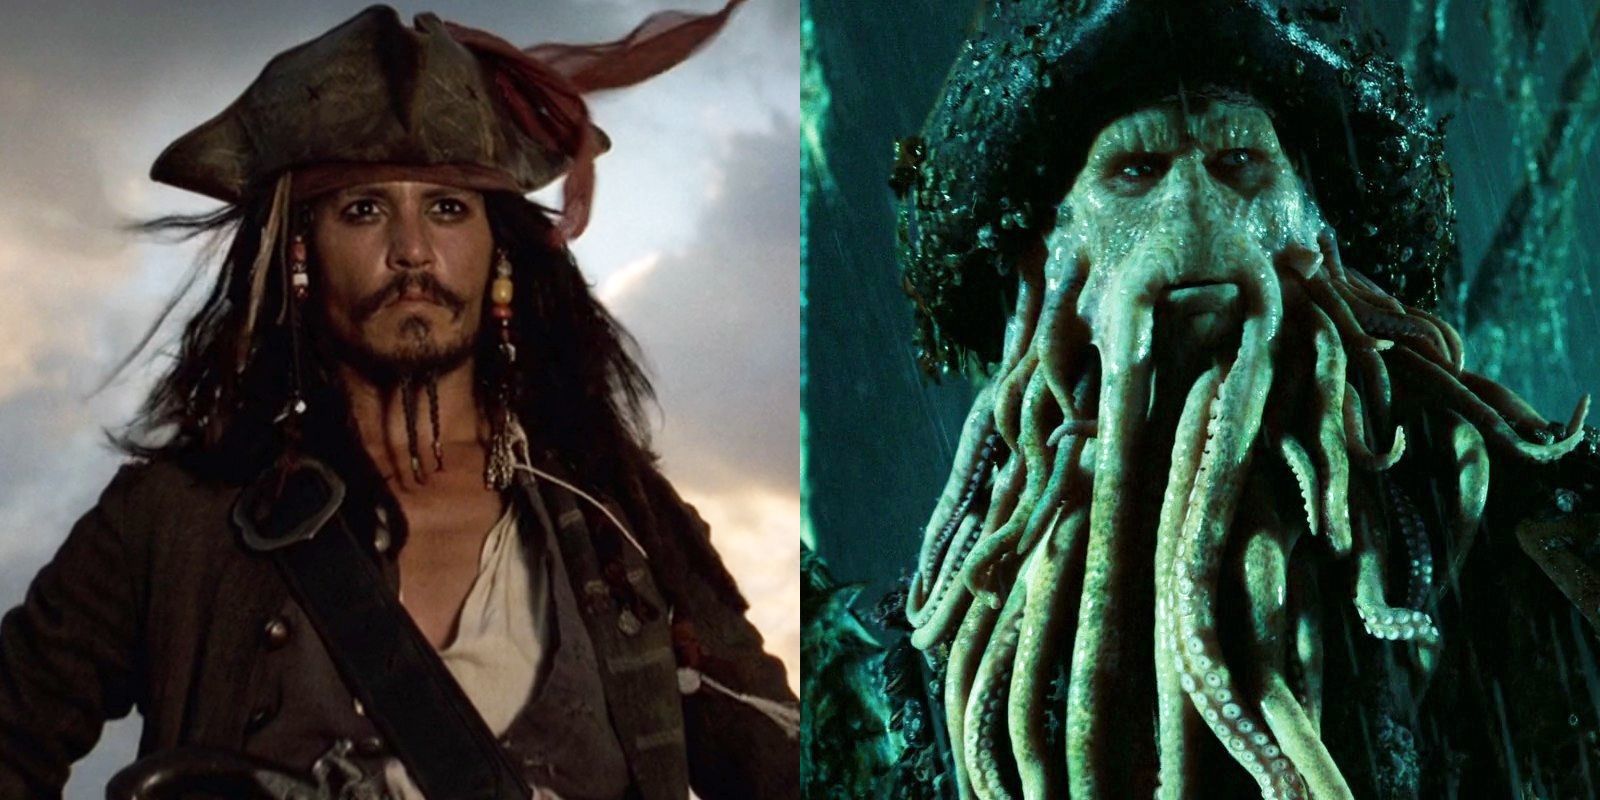 15 Best Pirates Of The Caribbean Characters, Ranked » GossipChimp